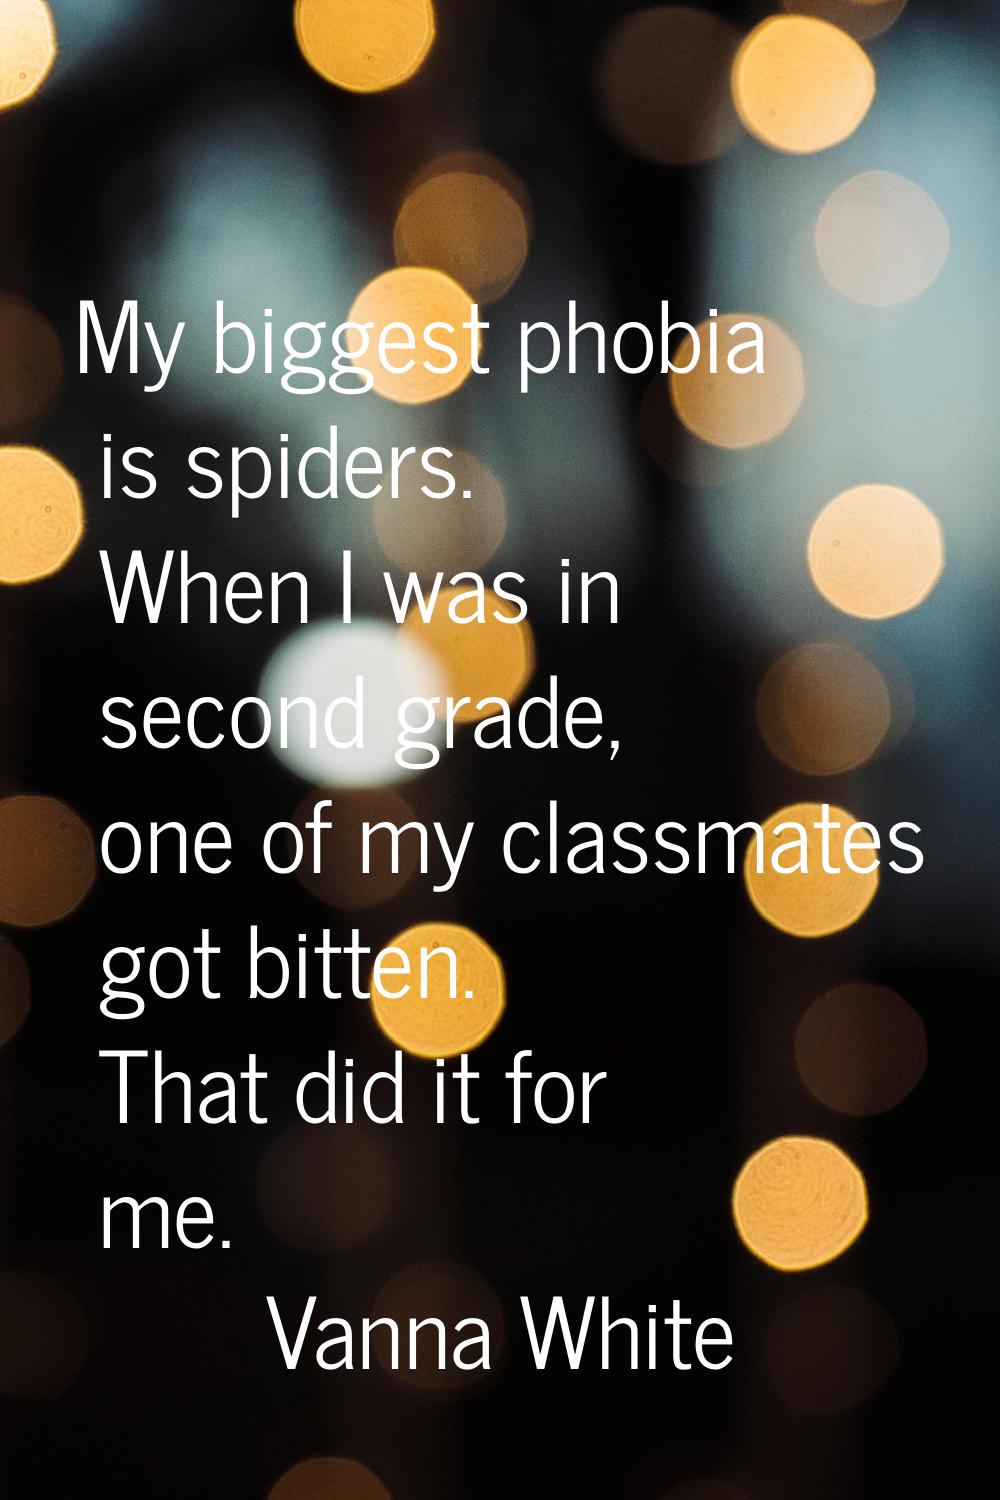 My biggest phobia is spiders. When I was in second grade, one of my classmates got bitten. That did